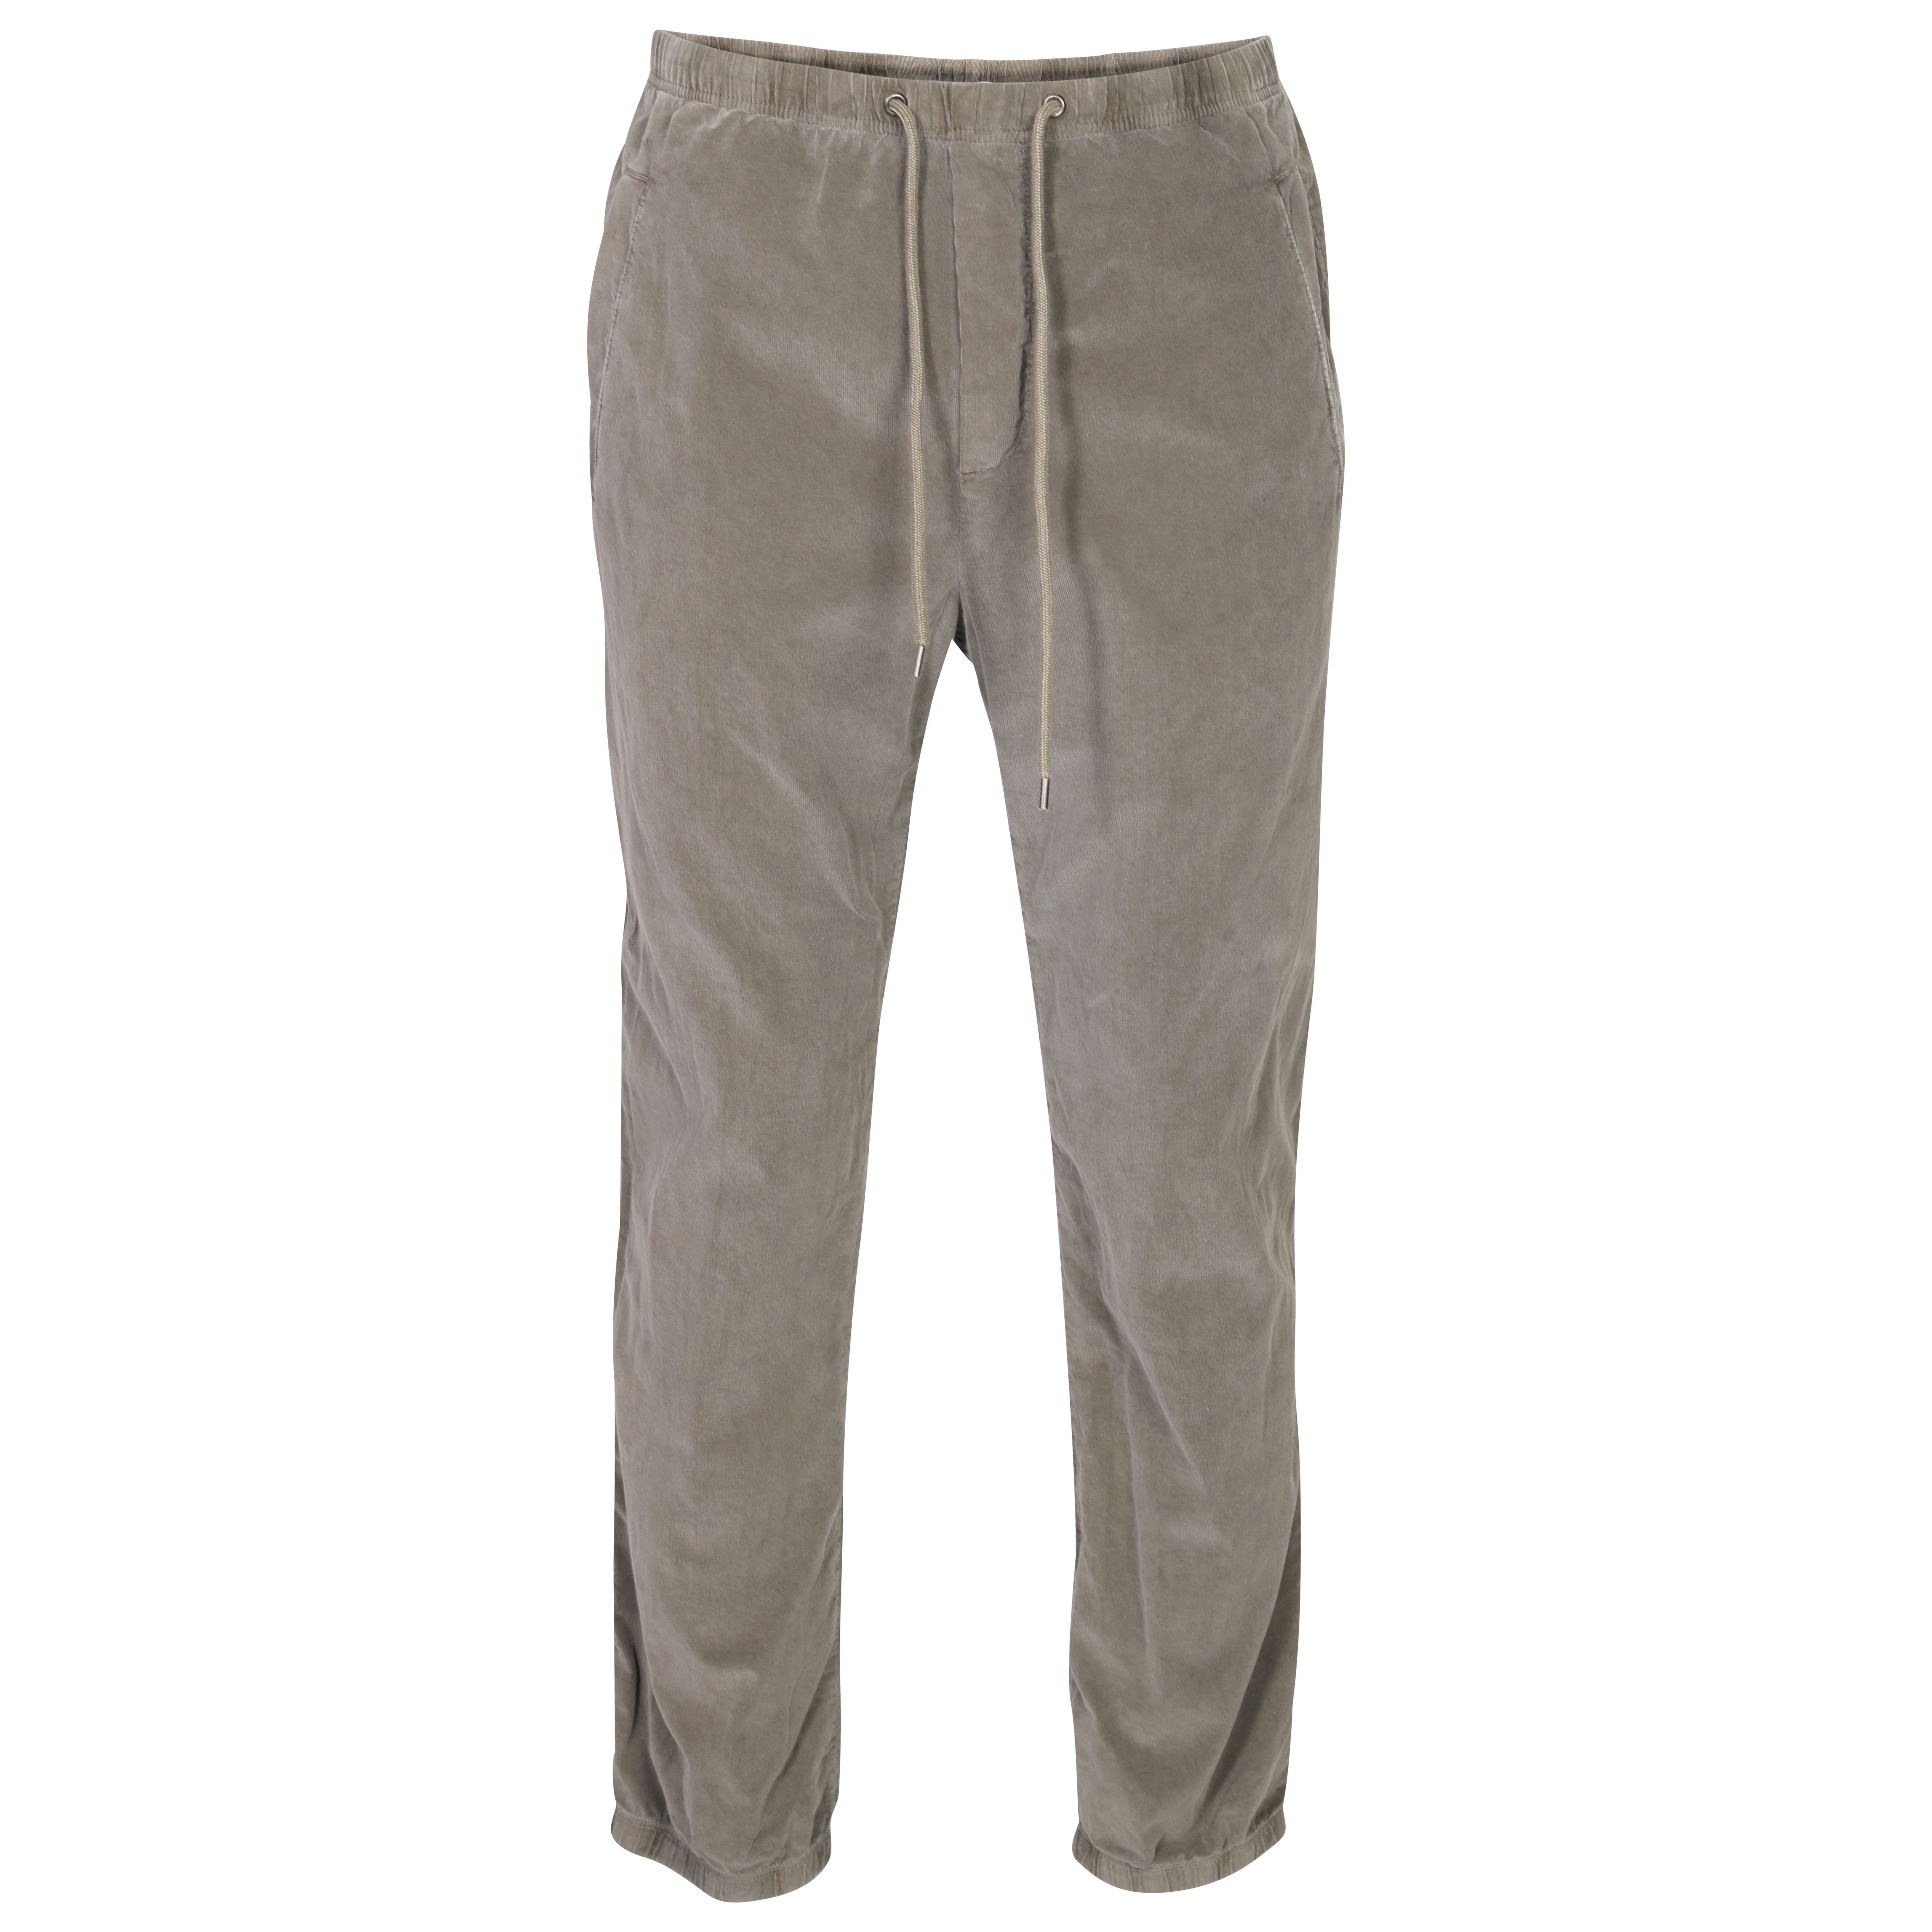 James Perse Ultra Fine Cord Pant in Grey L/3